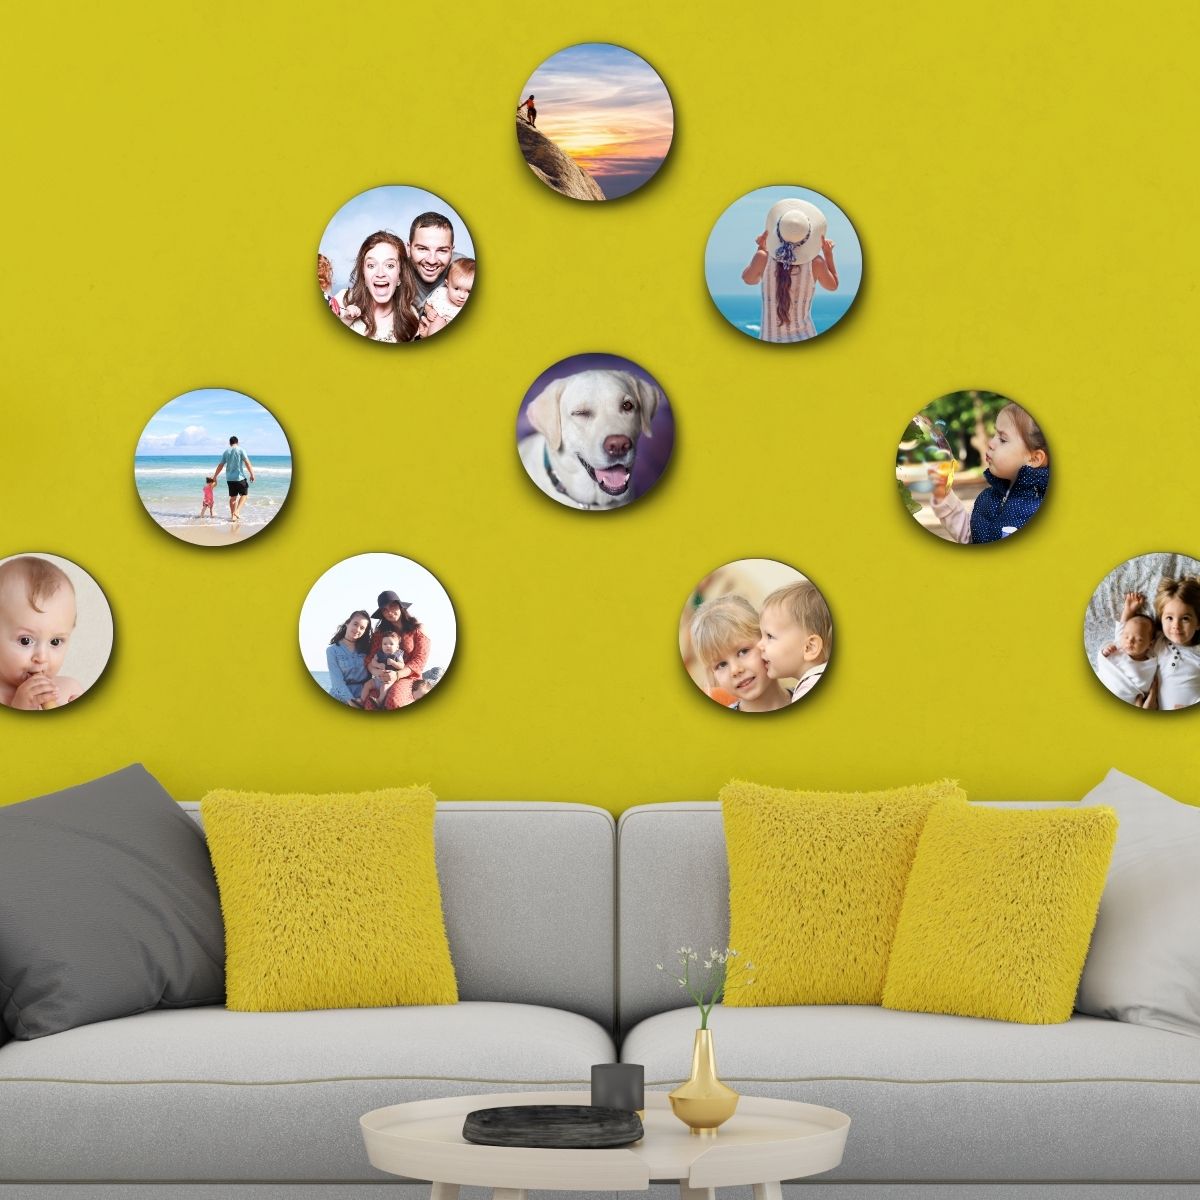  personalized Collage of 10 Round Photo Tiles